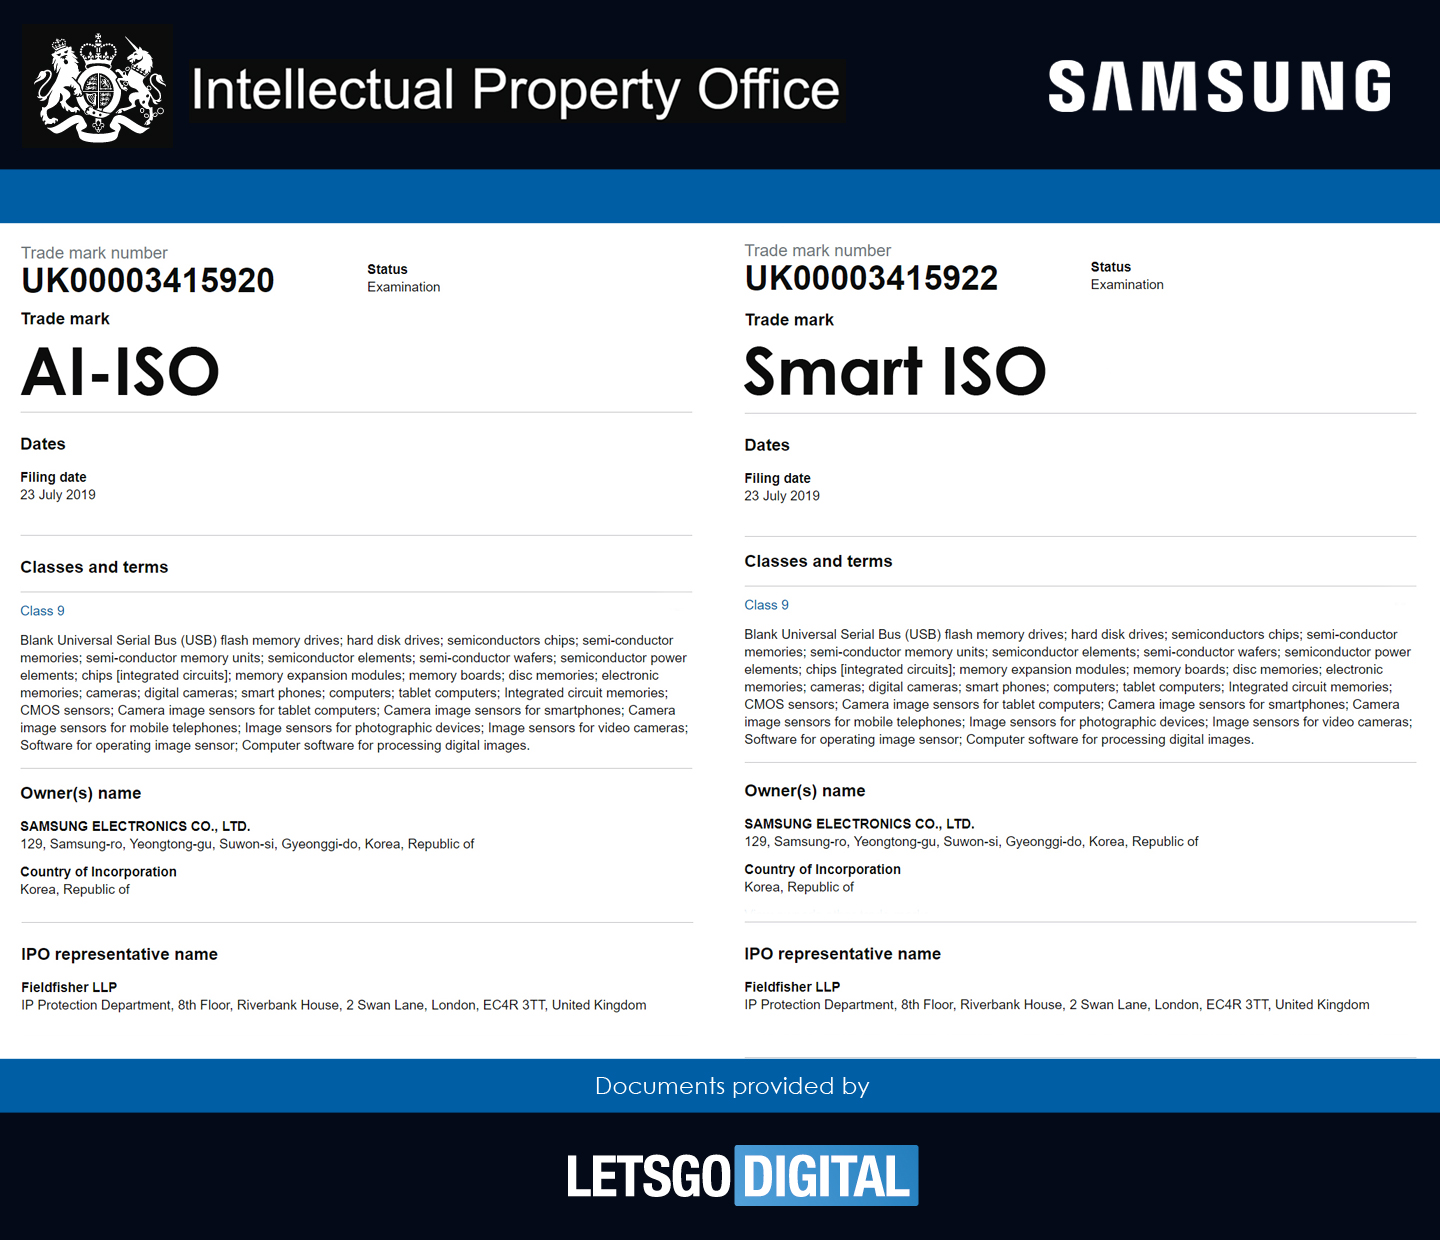 Samsung GALAXY S10 ai iso smart iso note 10 marca